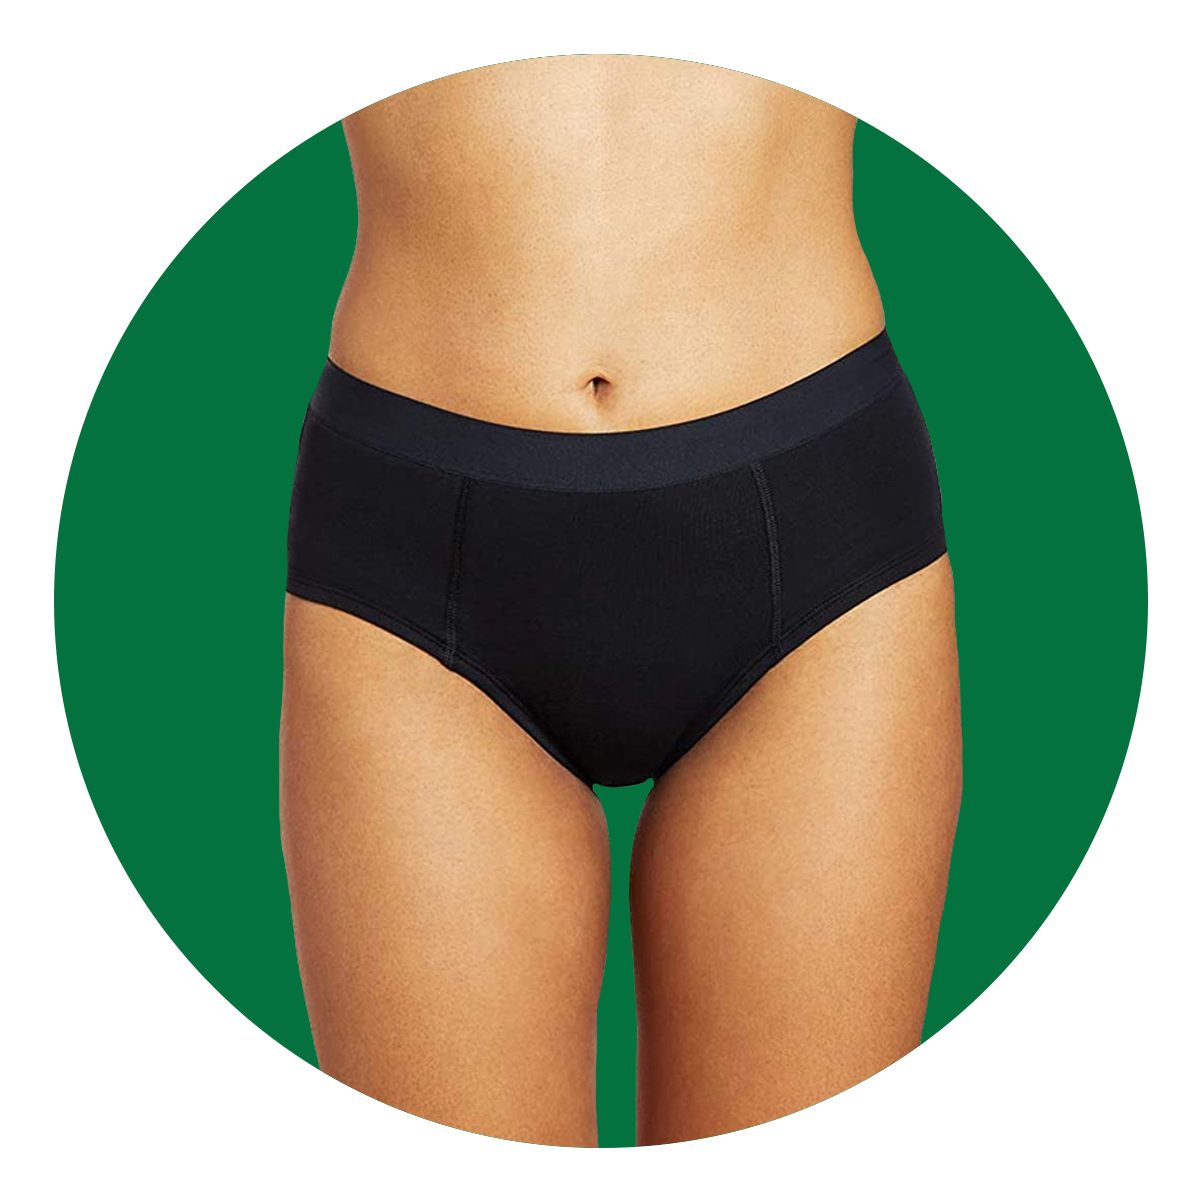 The Best Underwear Fabric to Avoid Yeast Infections – Magi